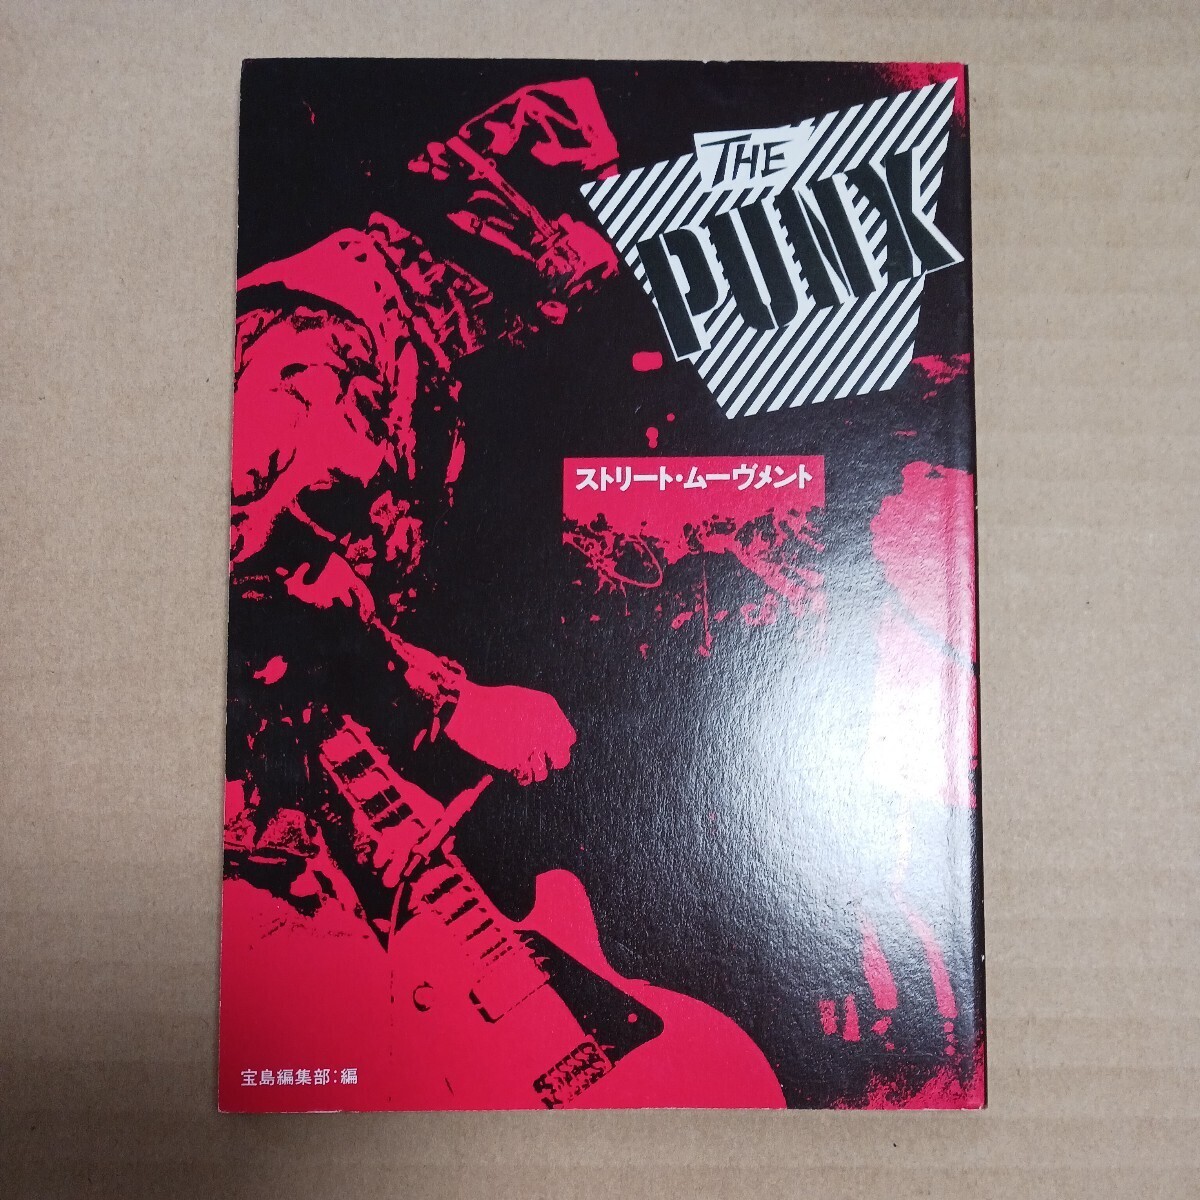 THE PUNX カセットブック オリジナル gism zouo outo mobs gauze swankys confuse death side lip cream punk crust パンク ハードコアの画像4